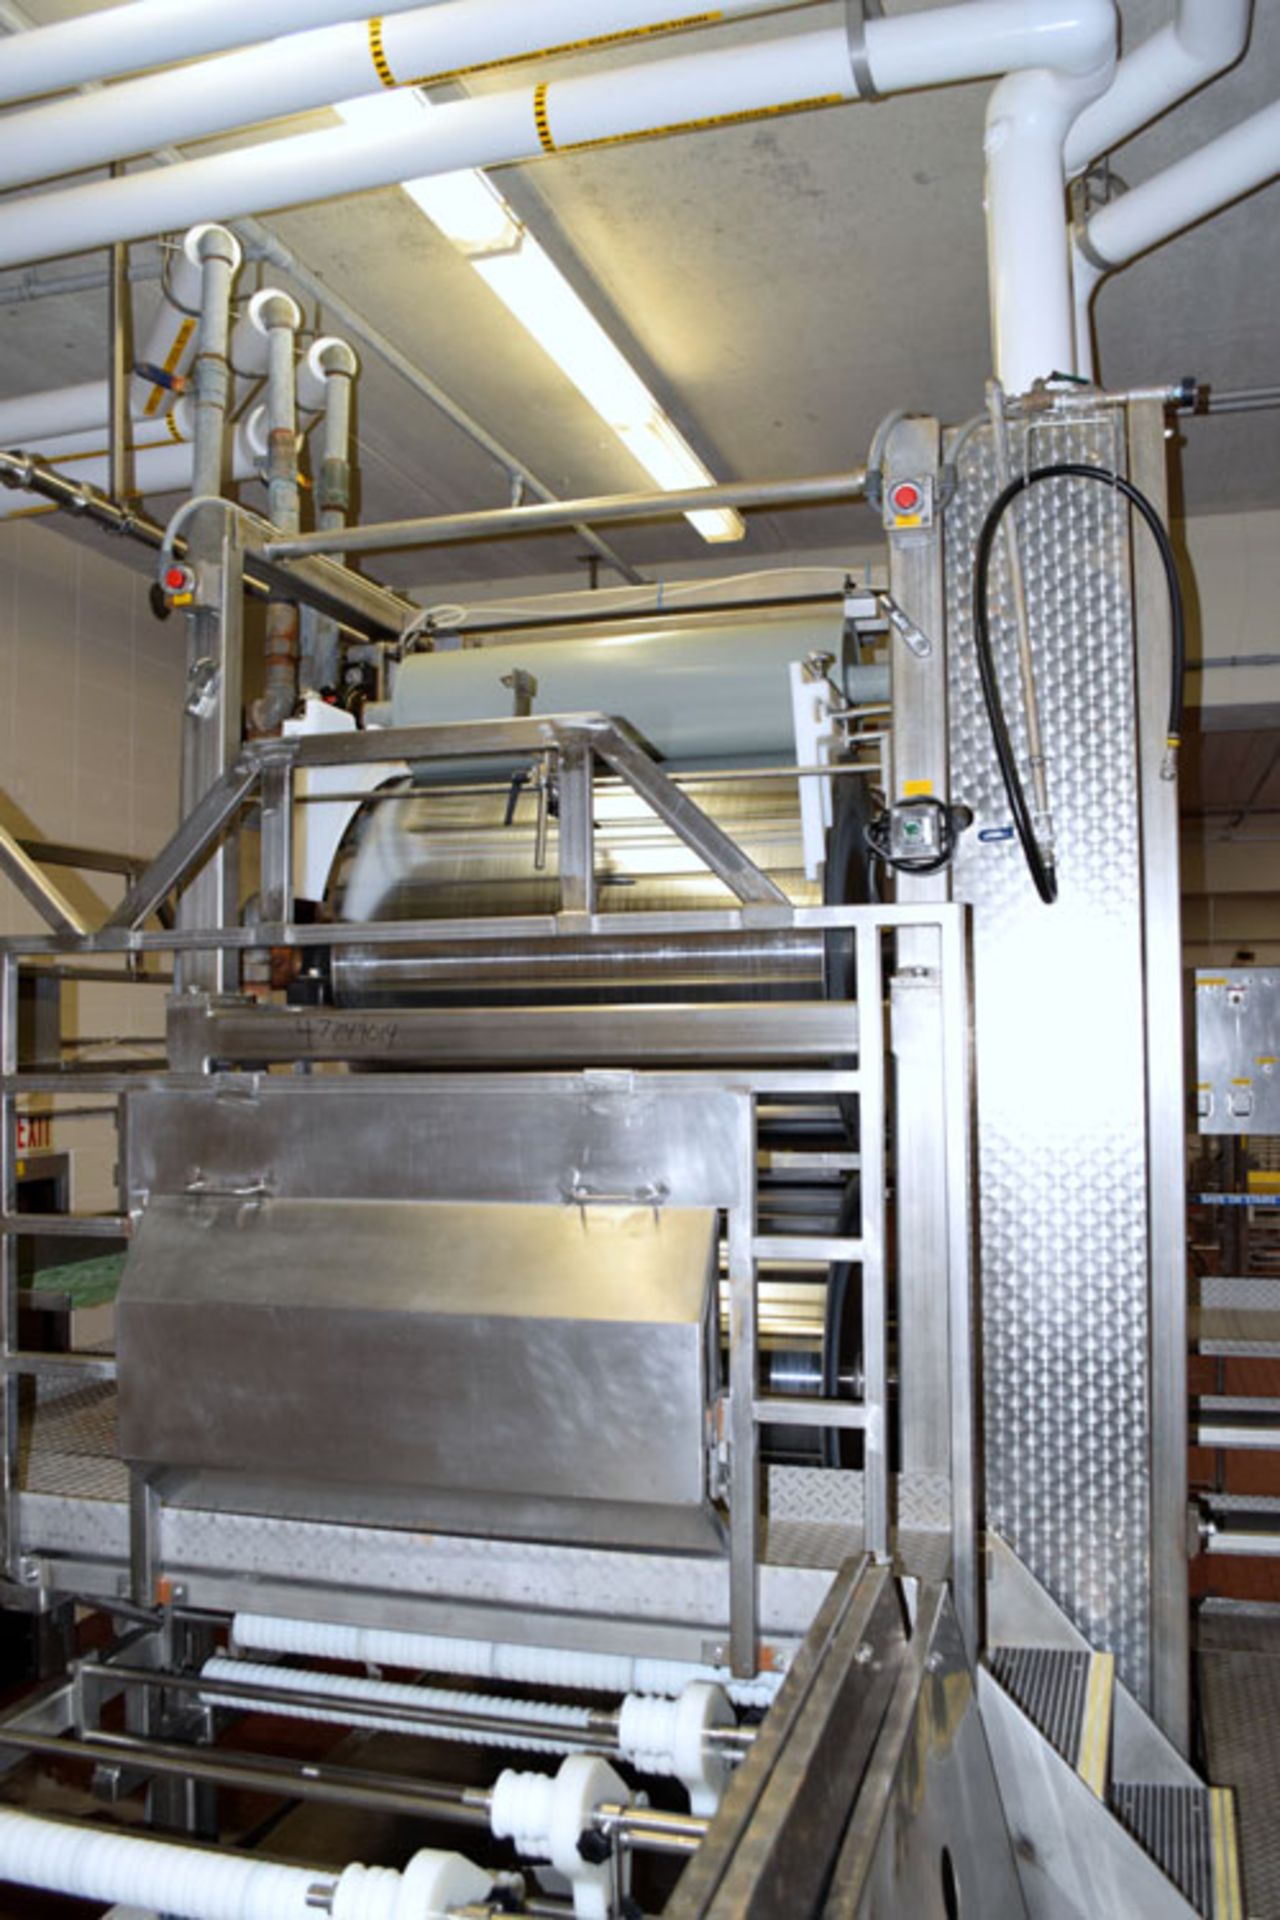 Natec chill roll stand (3 chrome plated cored rolls and 2 cored press rolls), Natec cold knife - Image 6 of 59